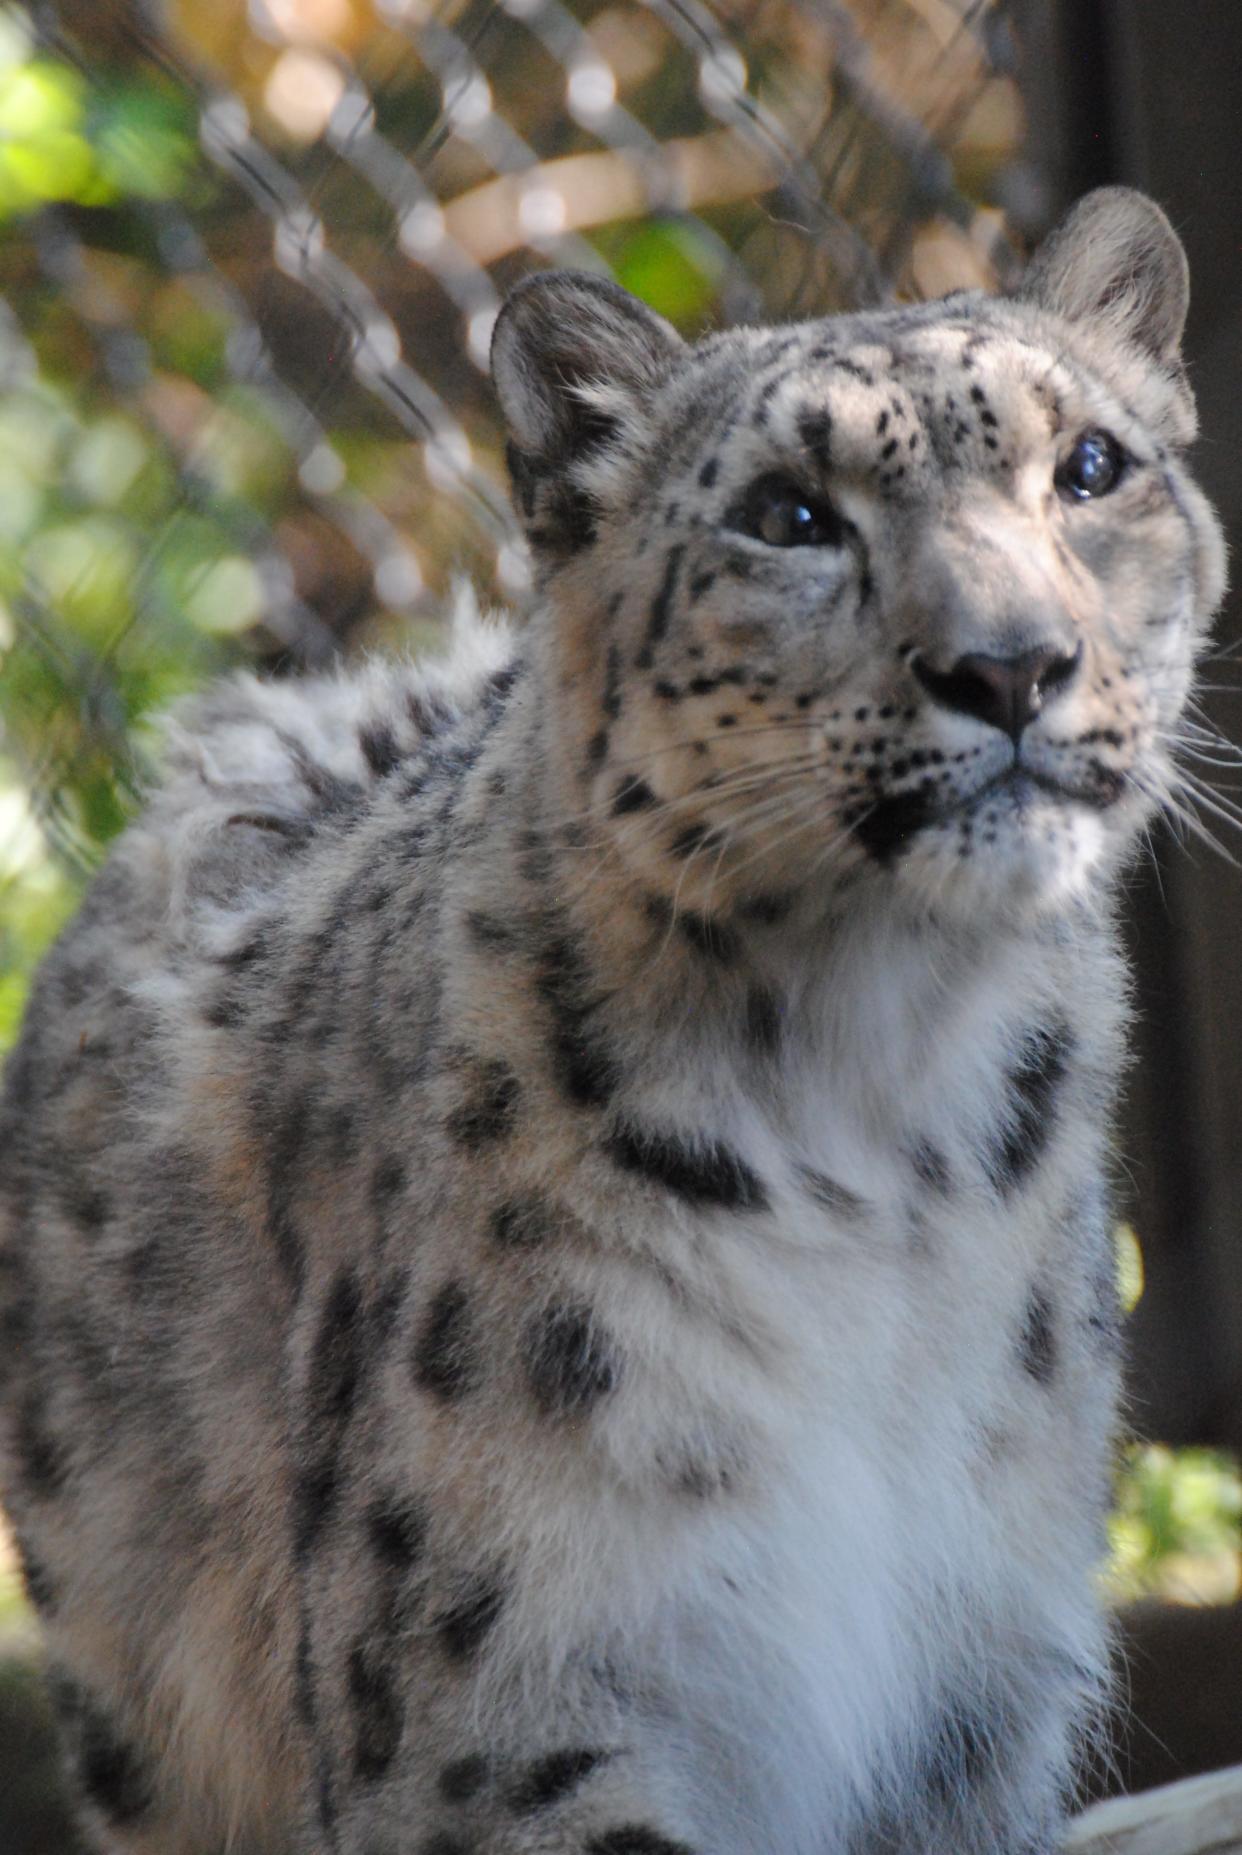 Baya, a snow leopard at the Great Plains Zoo, died on Thursday evening.